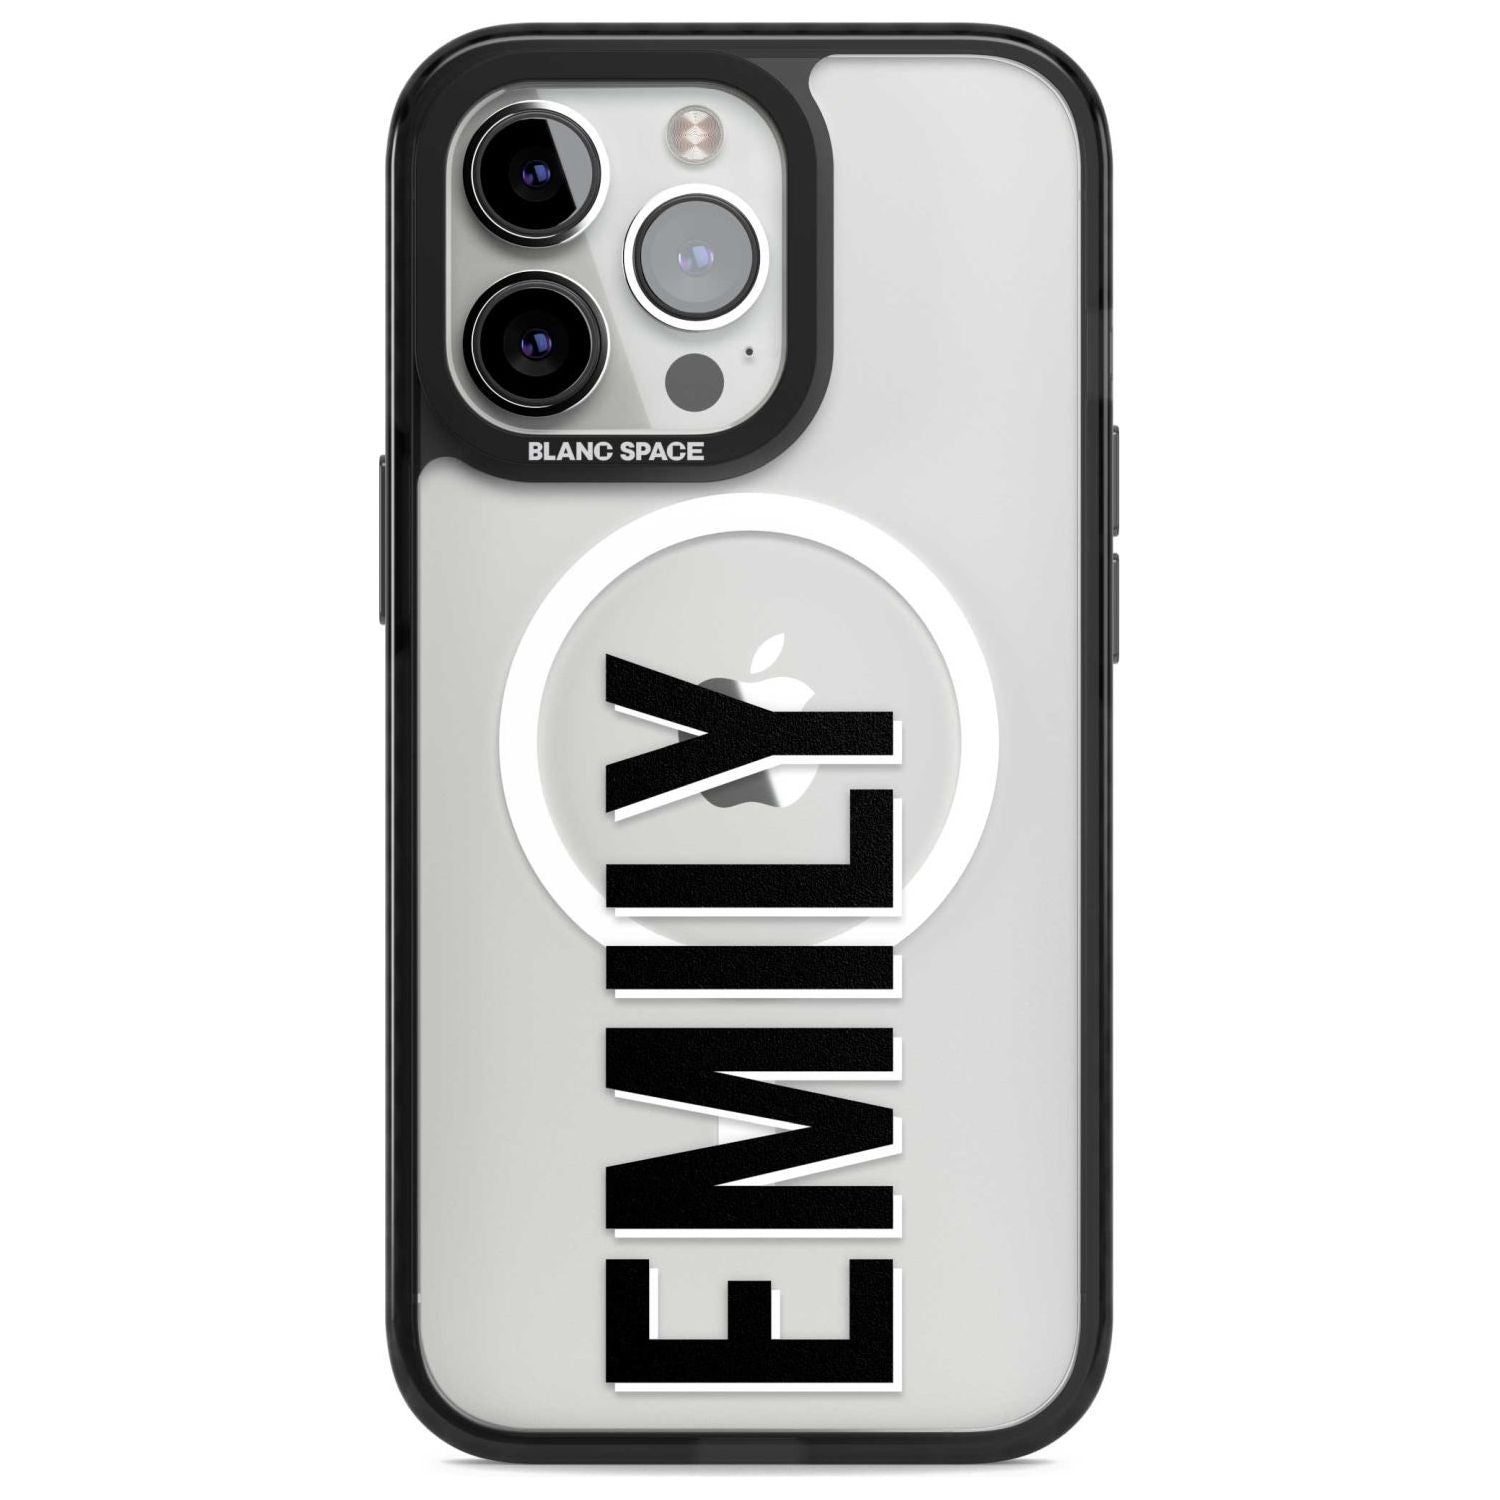 Personalised Clear Text  3A Custom Phone Case iPhone 15 Pro Max / Magsafe Black Impact Case,iPhone 15 Pro / Magsafe Black Impact Case,iPhone 14 Pro Max / Magsafe Black Impact Case,iPhone 14 Pro / Magsafe Black Impact Case,iPhone 13 Pro / Magsafe Black Impact Case Blanc Space